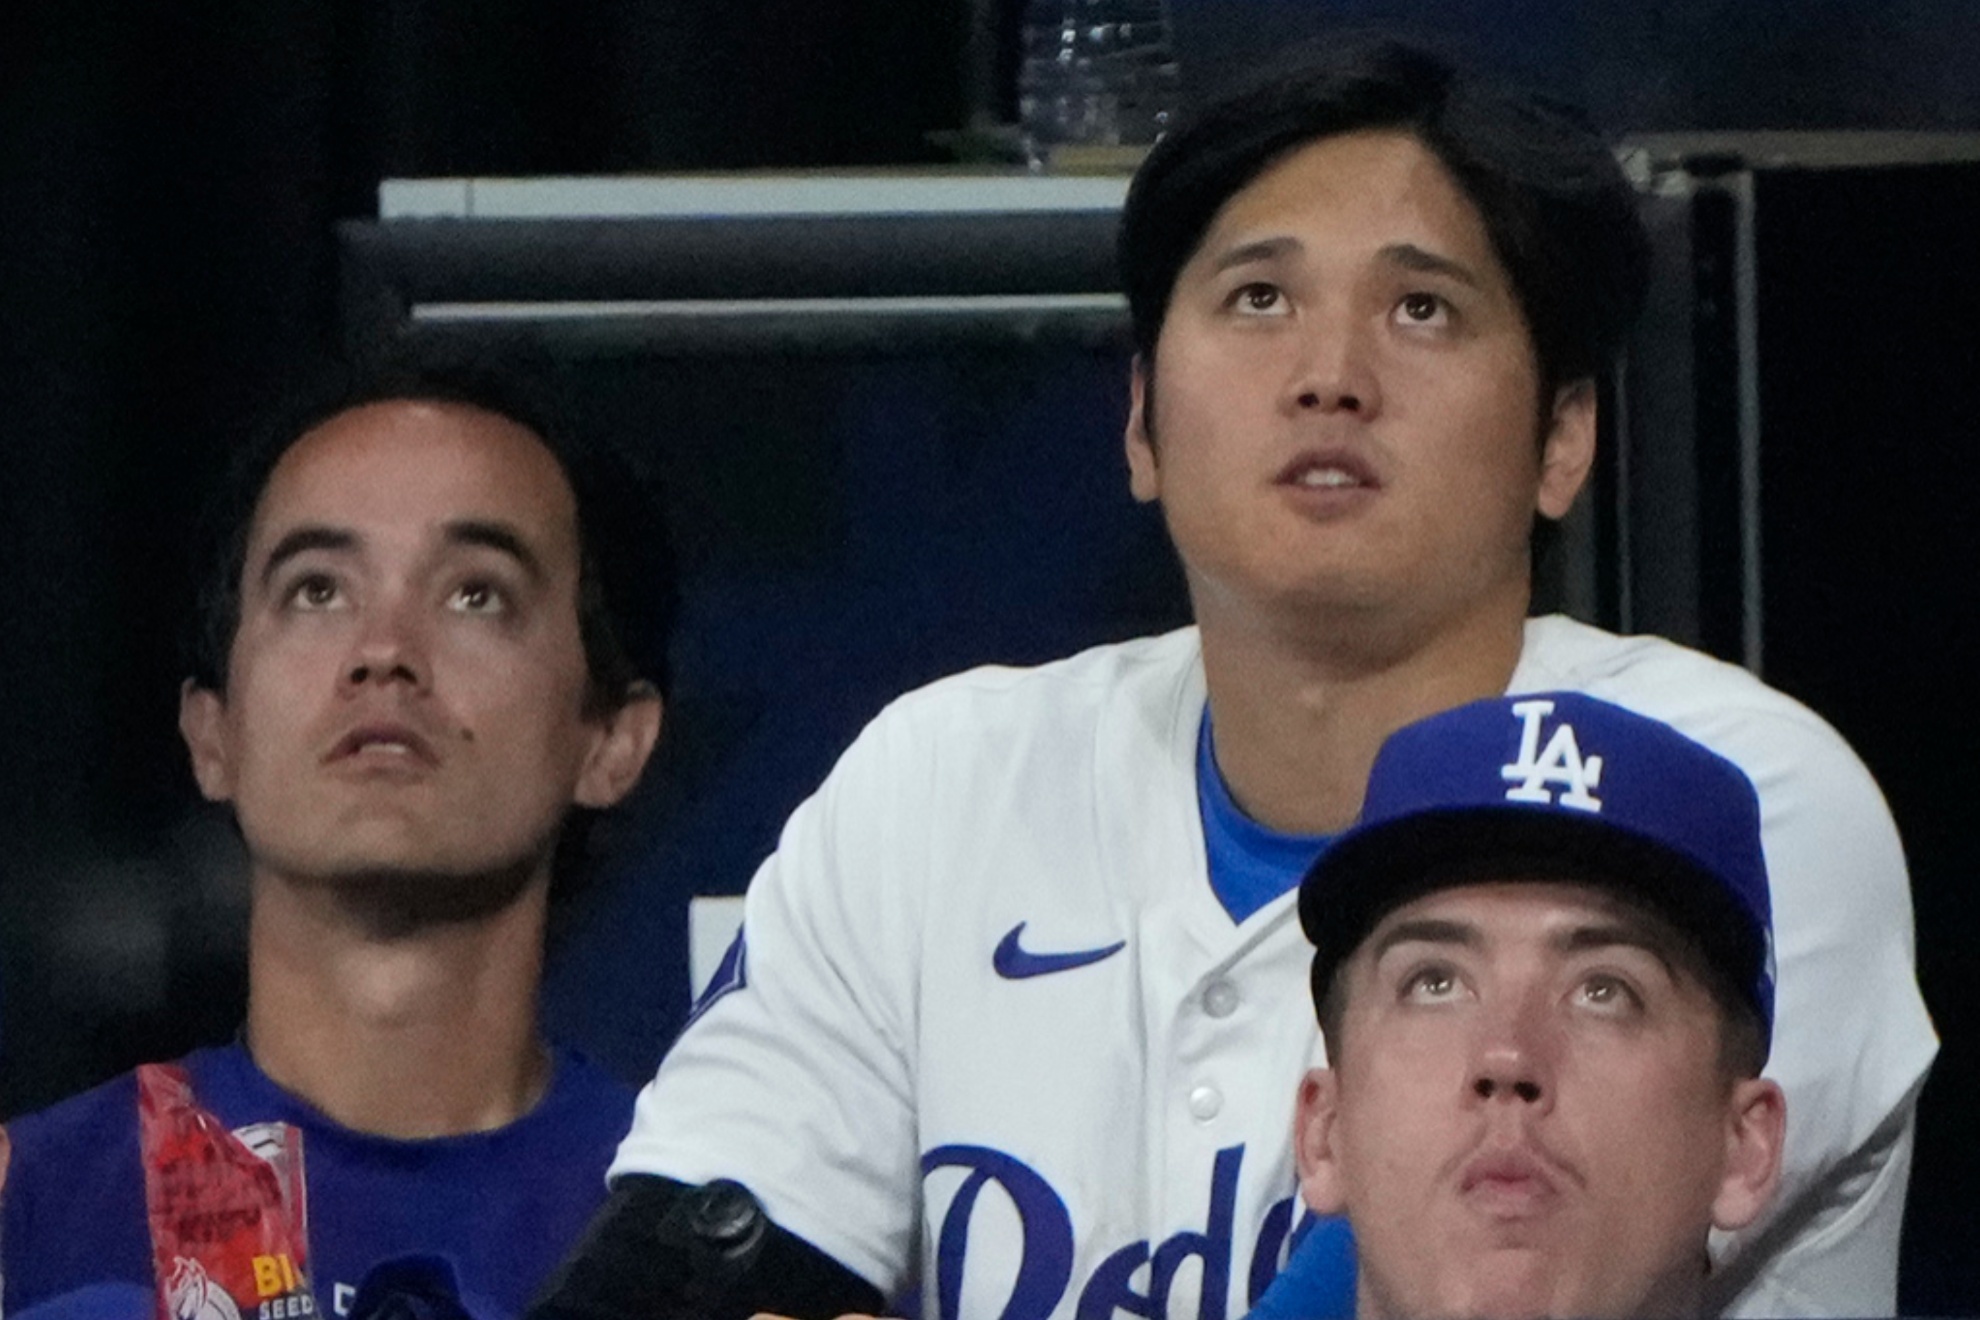 Shohei Ohtani, top right, and interpreter Will Ireton (L) at the game against the SD Padres.